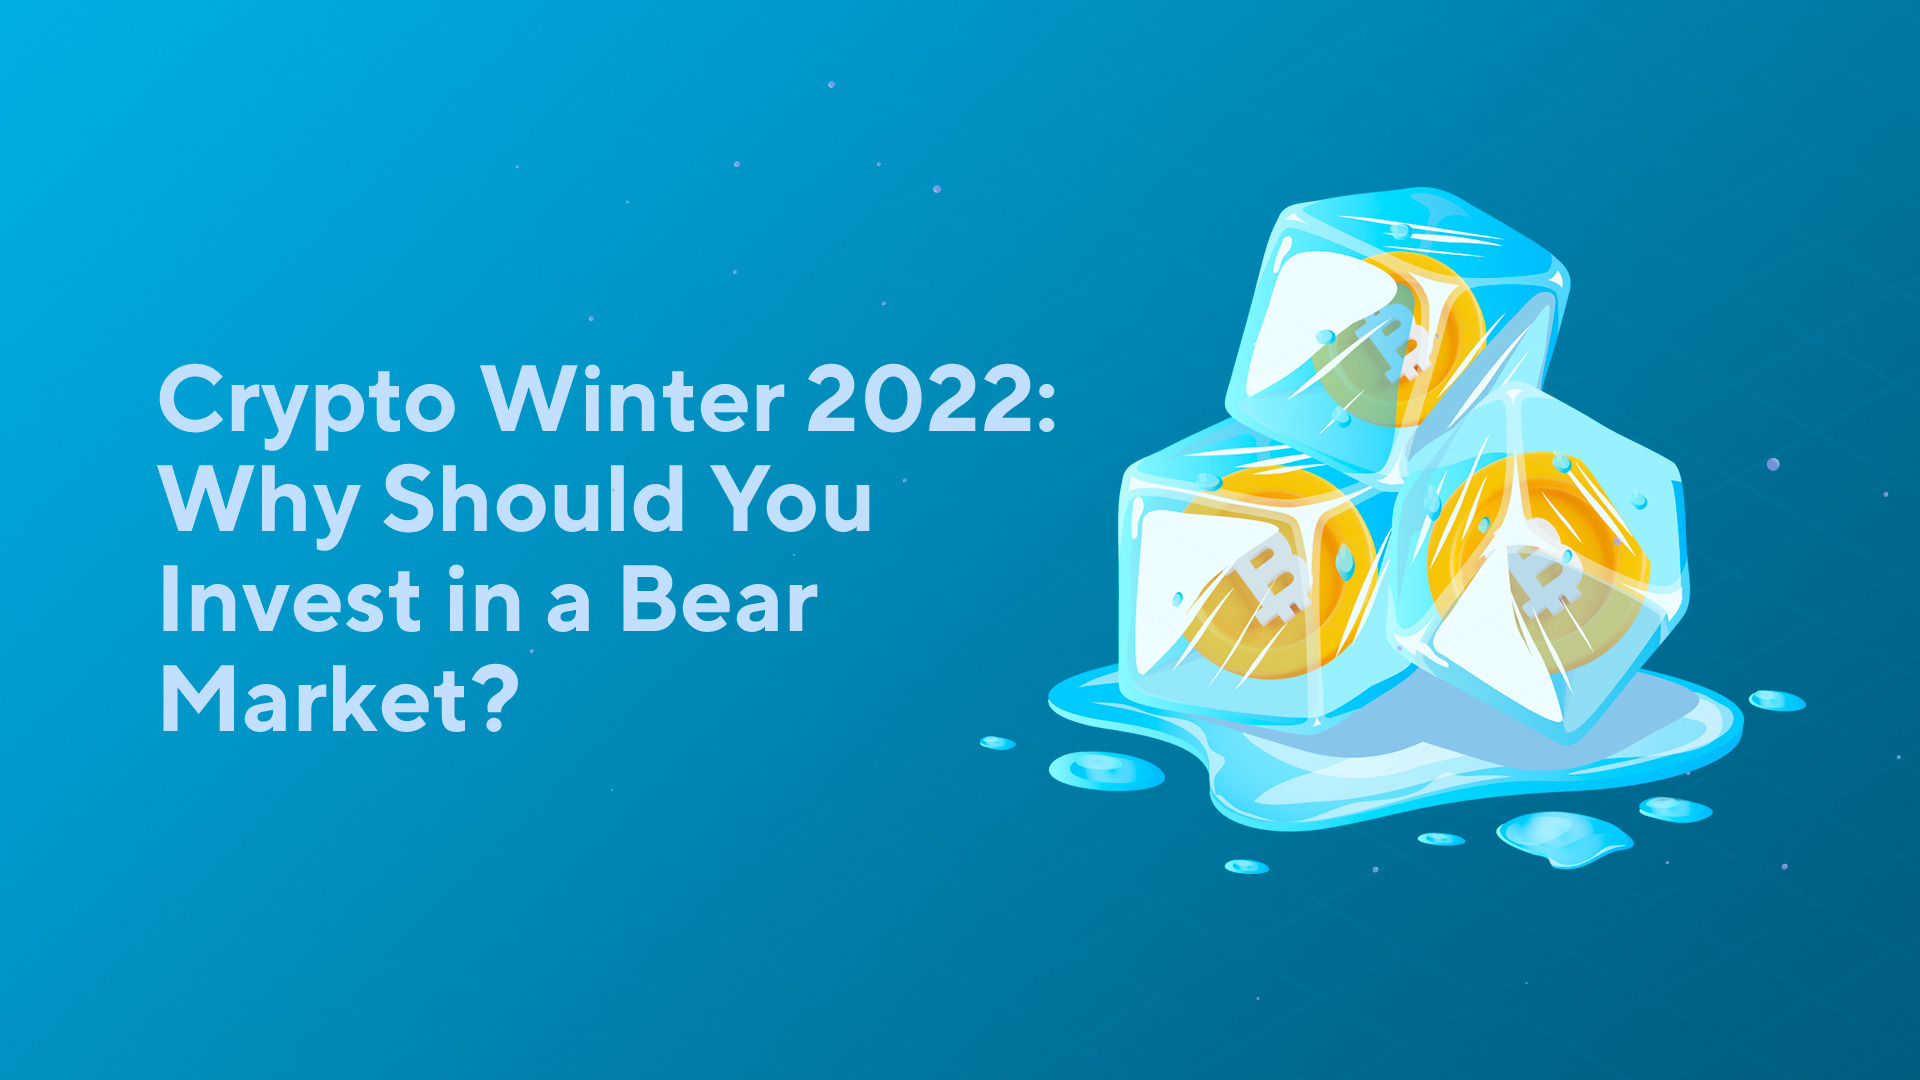 Crypto Winter 2023: Why Should You Invest in a Bear Market?